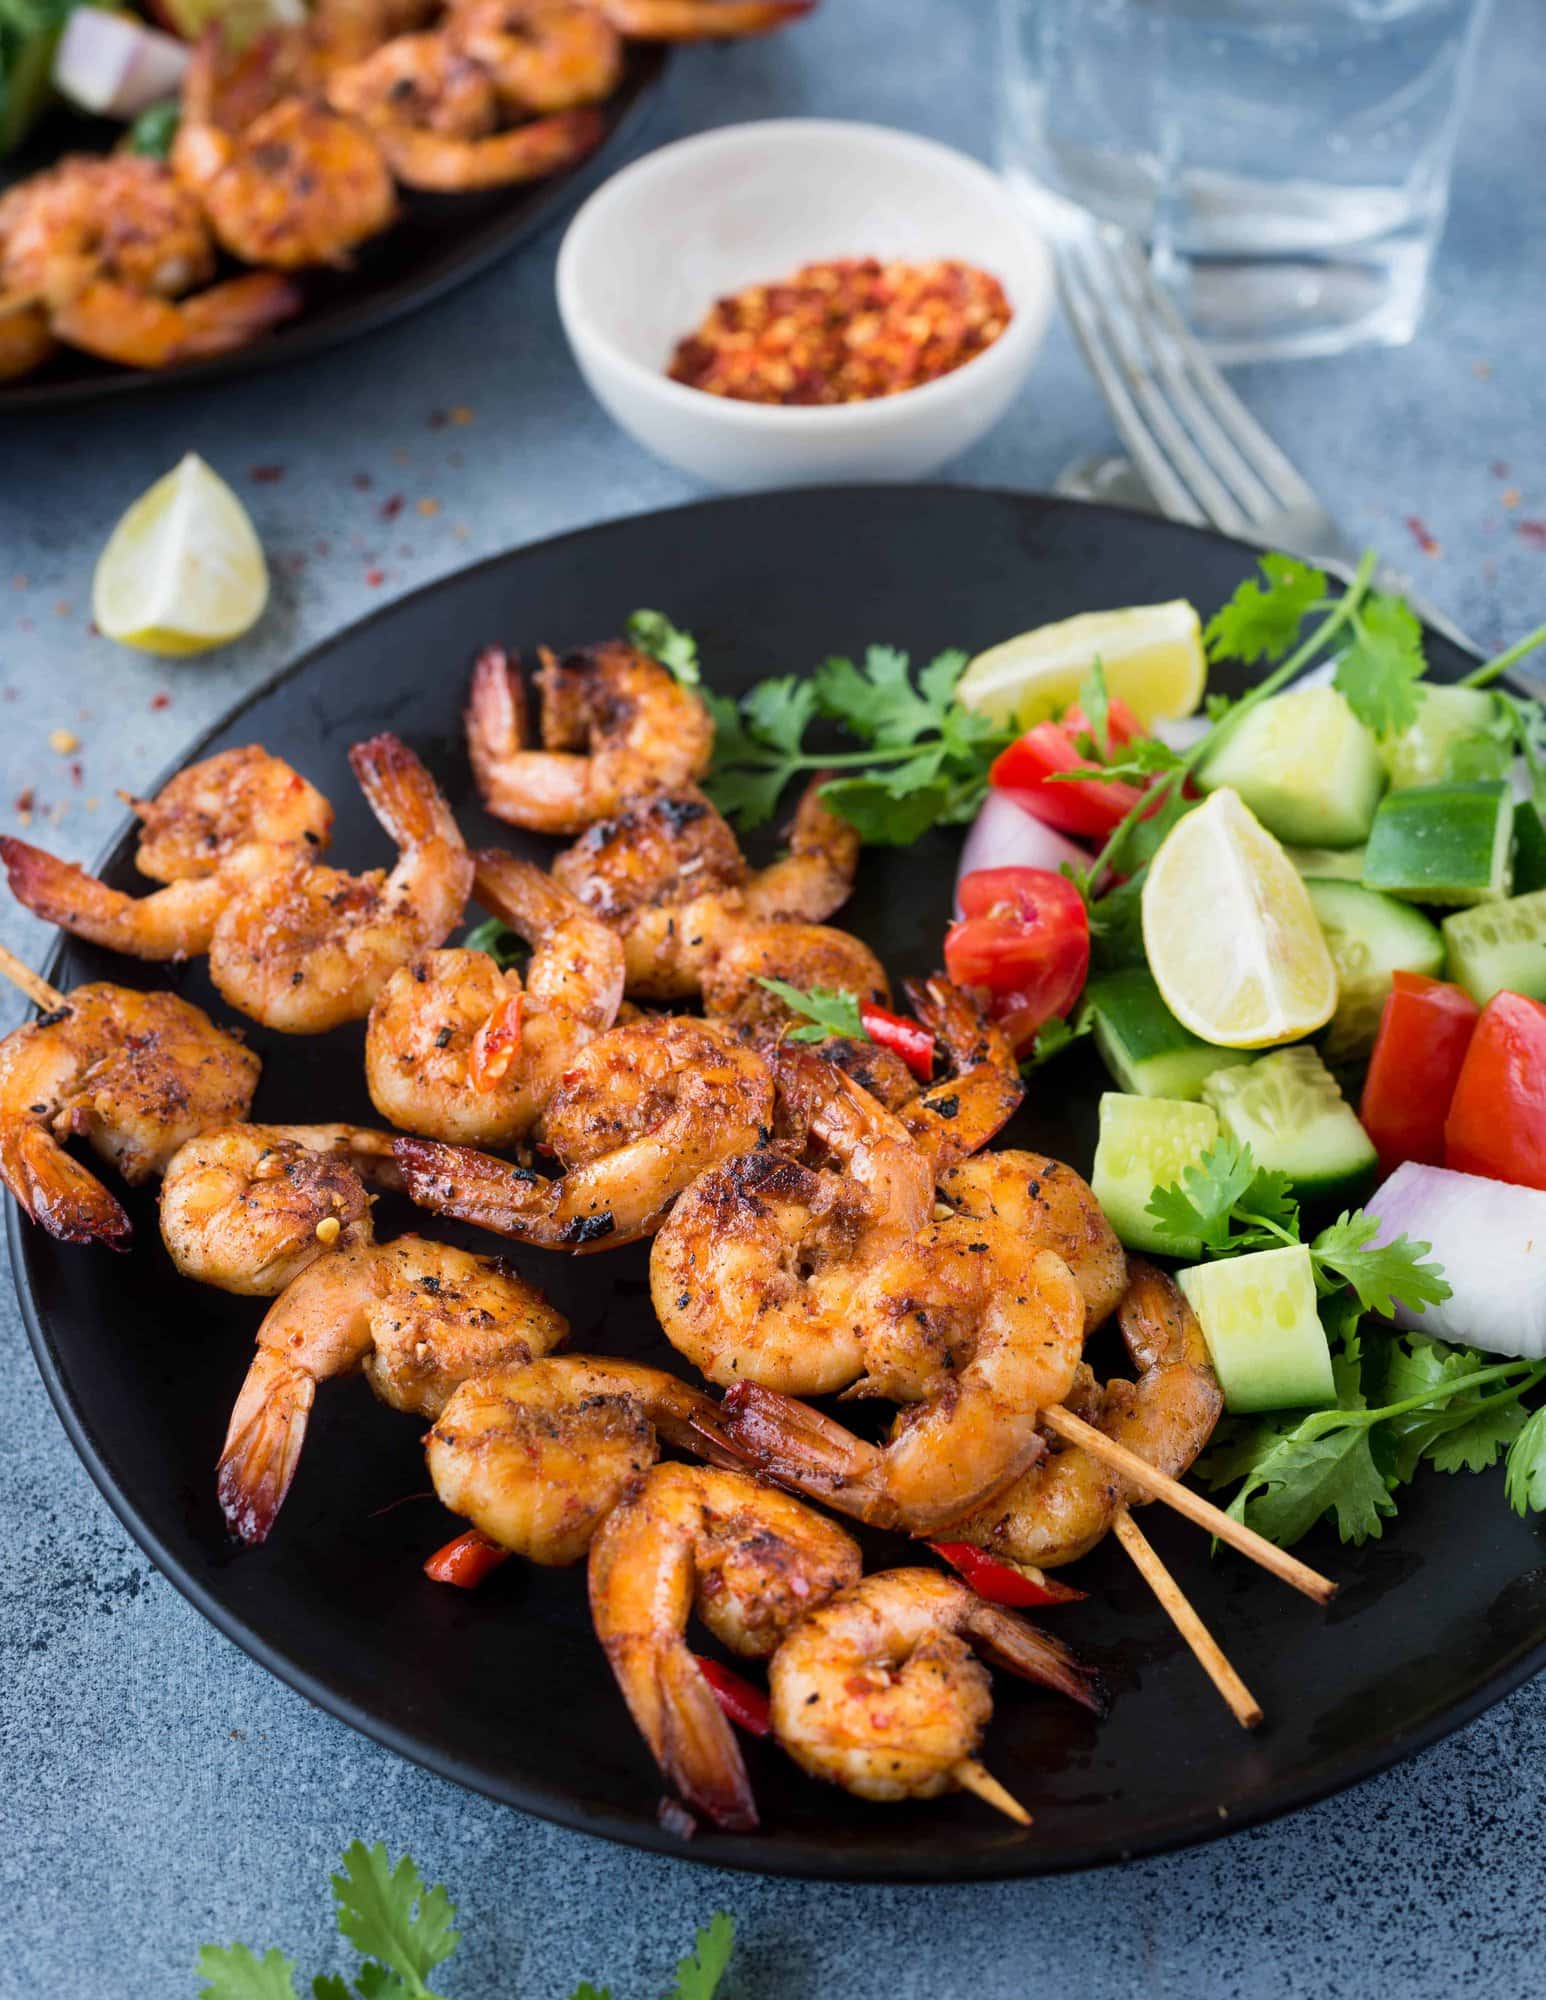  Vietnamese Grilled Shrimps are Shrimps marinated in lemongrass, fish sauce, spices and grilled till golden brown. Refreshing lemon flavour, pungent fish sauce and aromatic spices make grilled shrimps so delicious.